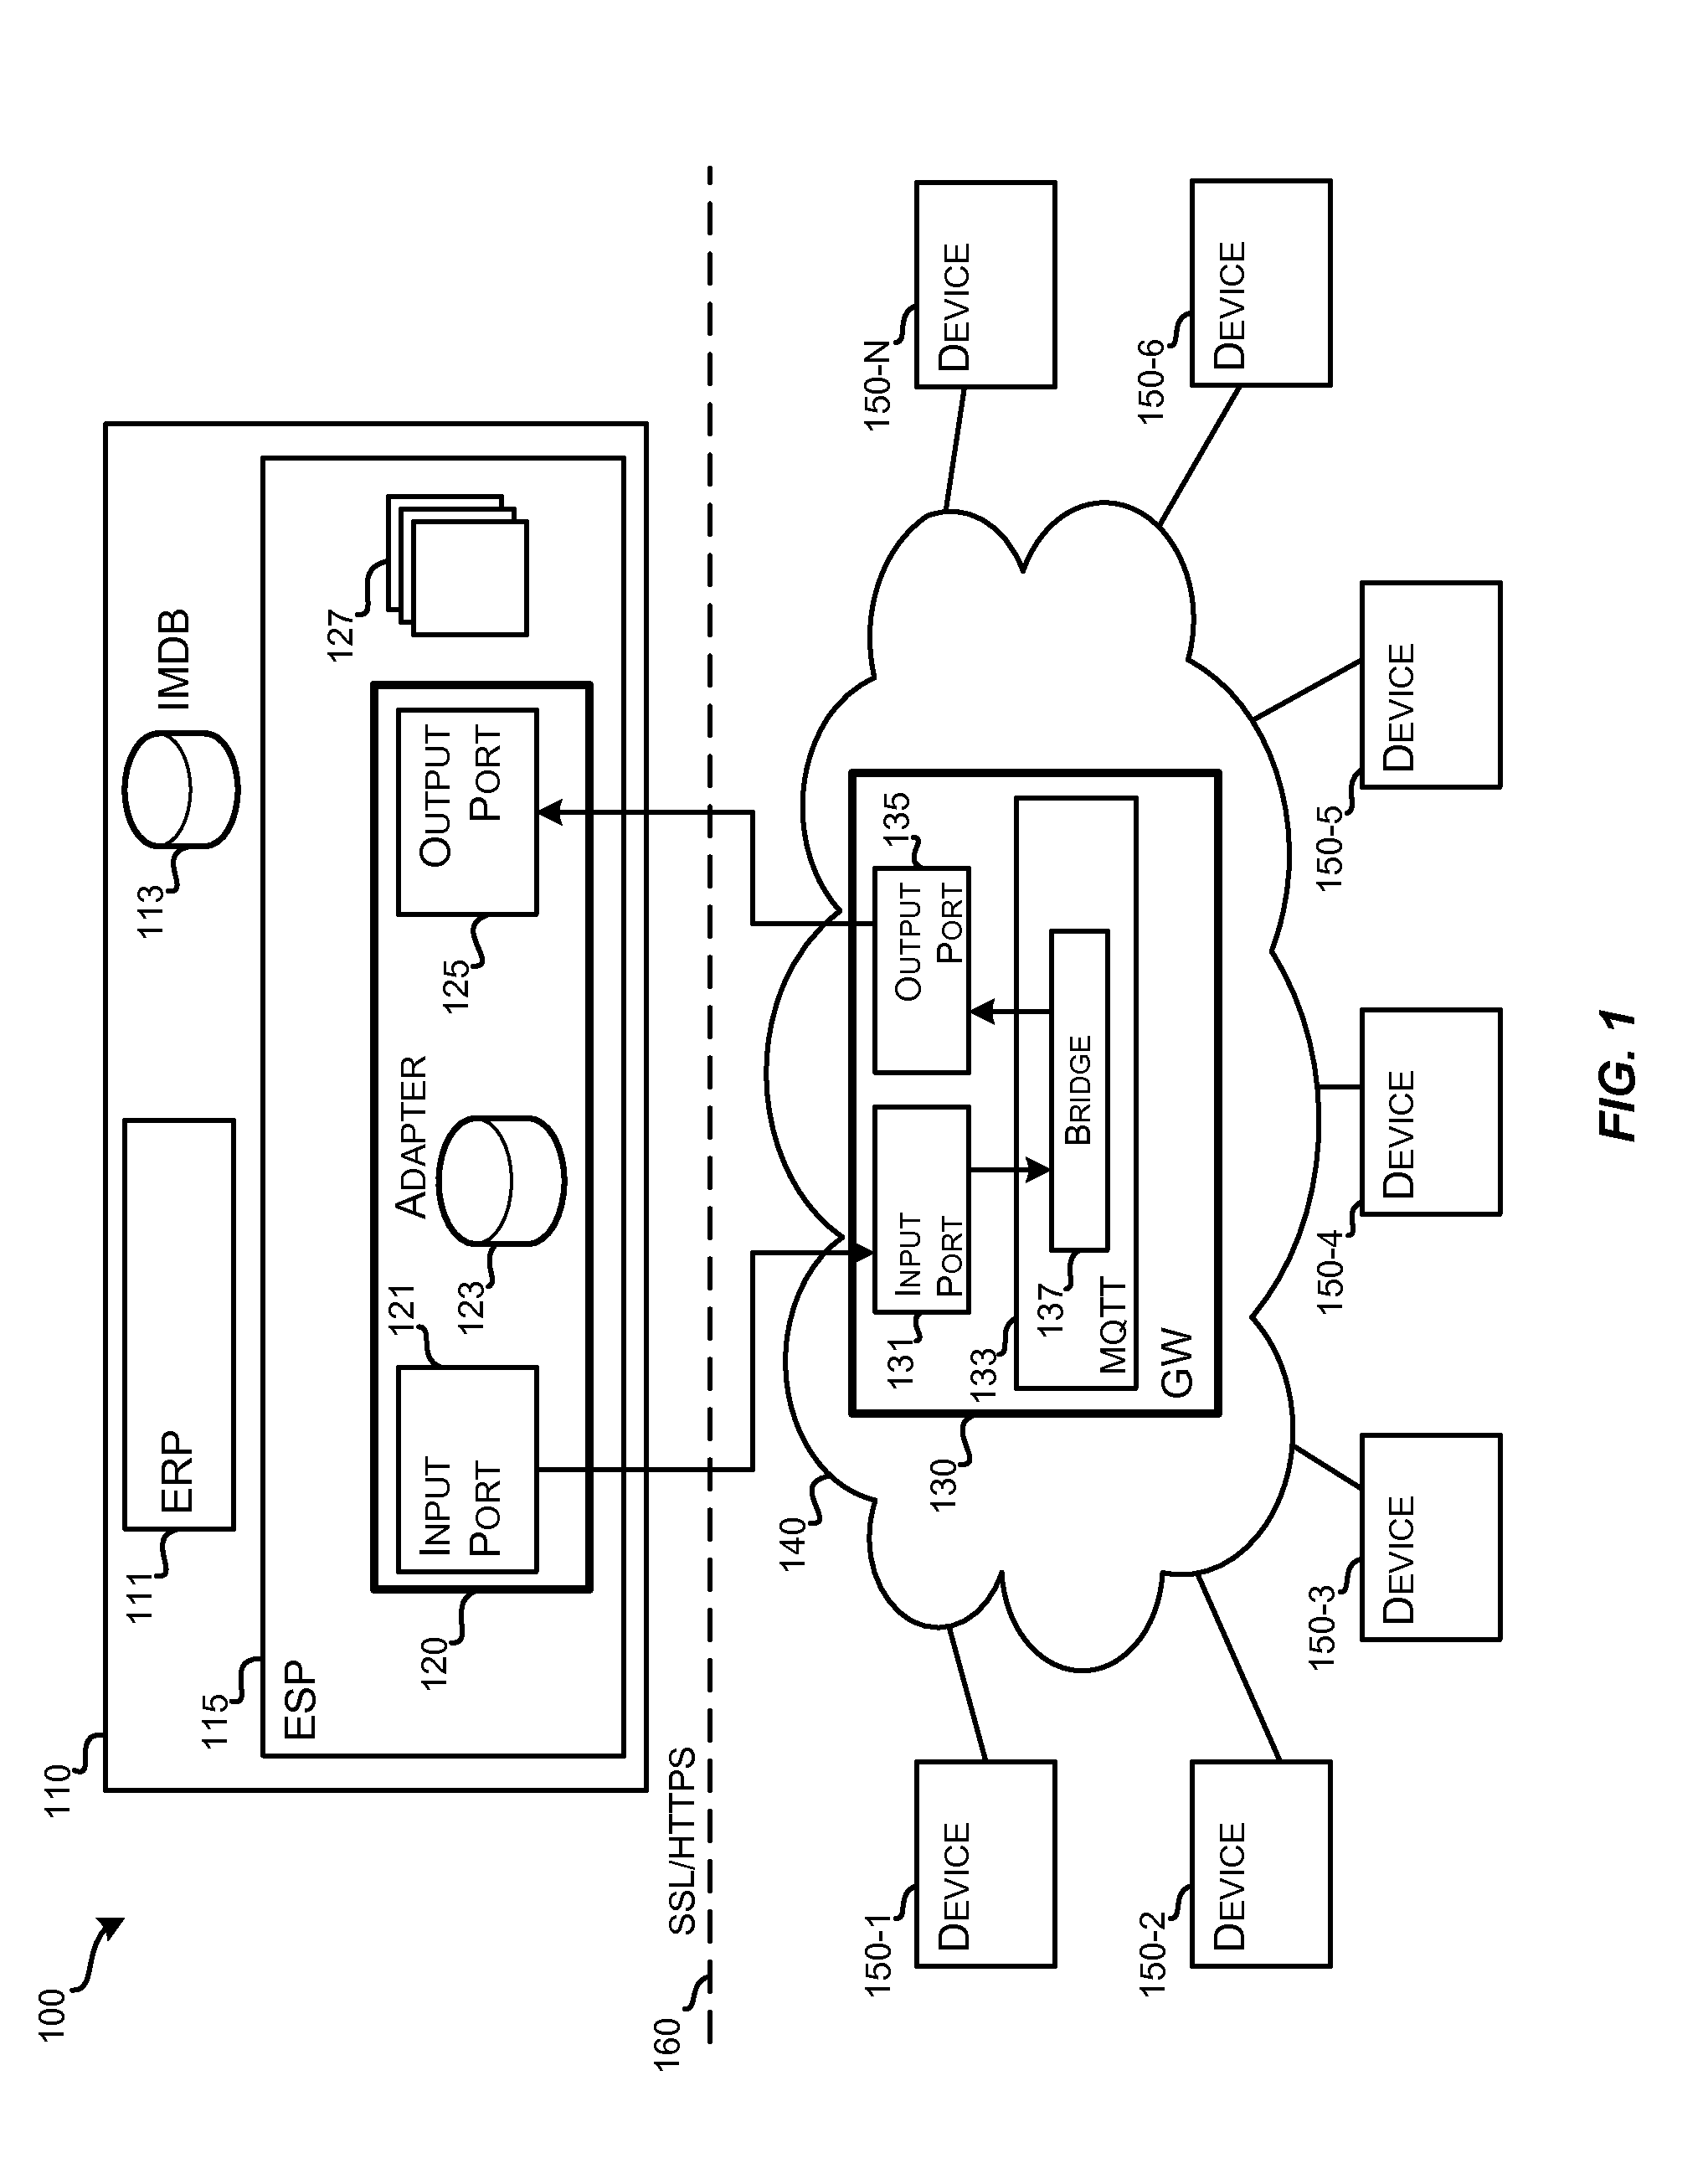 Managed Device-to-Device Communication in Business Computing Systems